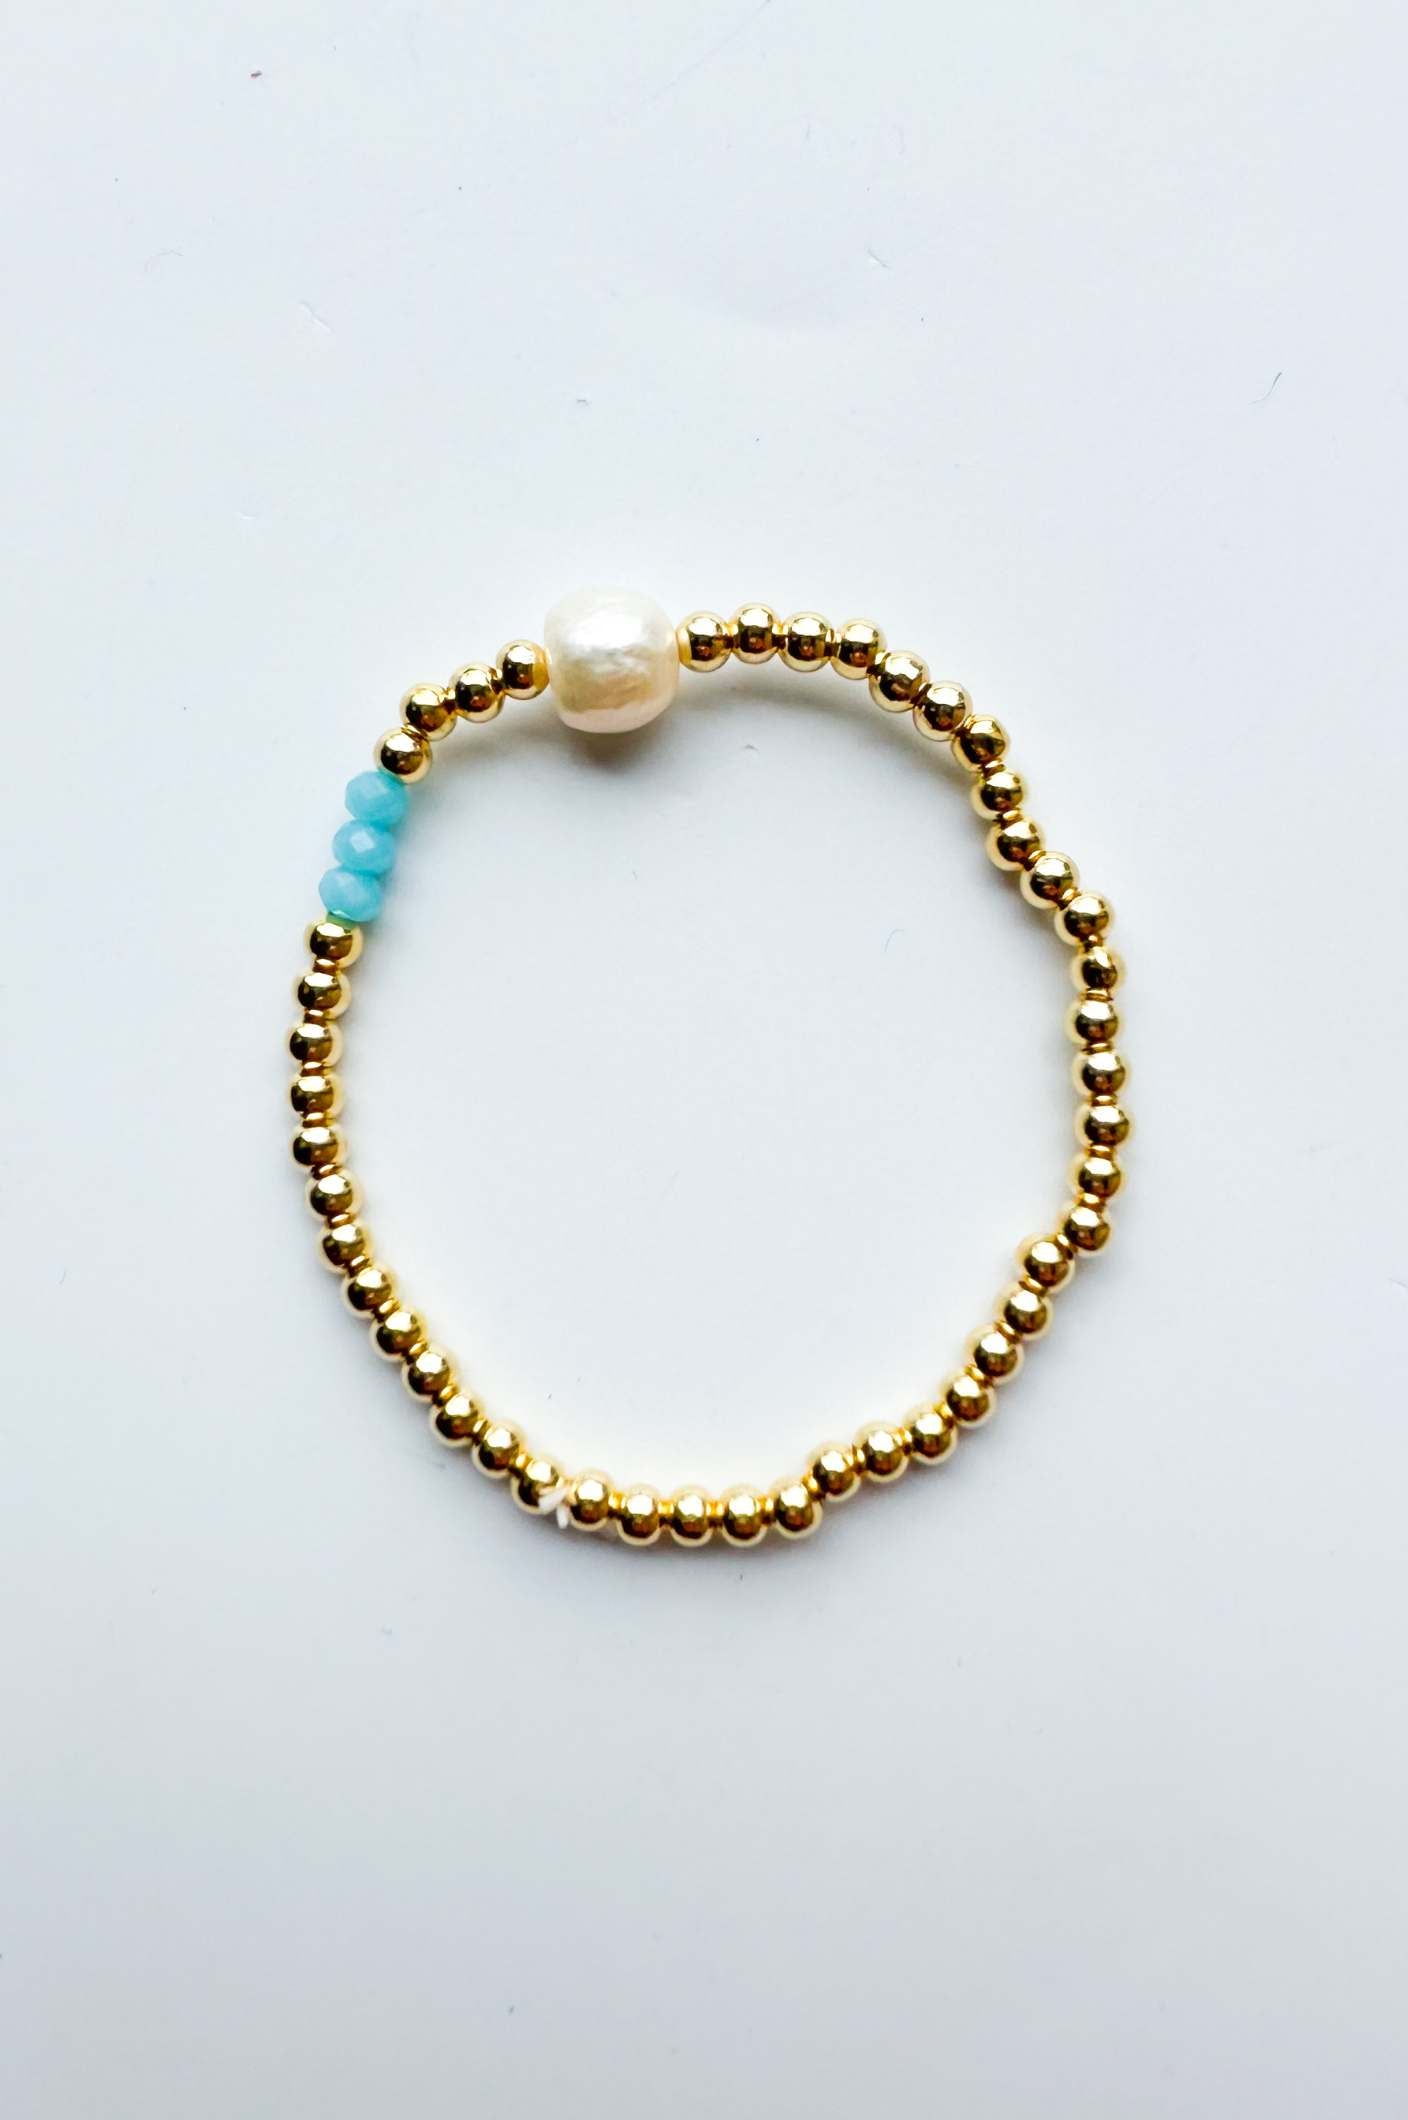 This is the Moment Gold Filled Pearl Bracelet